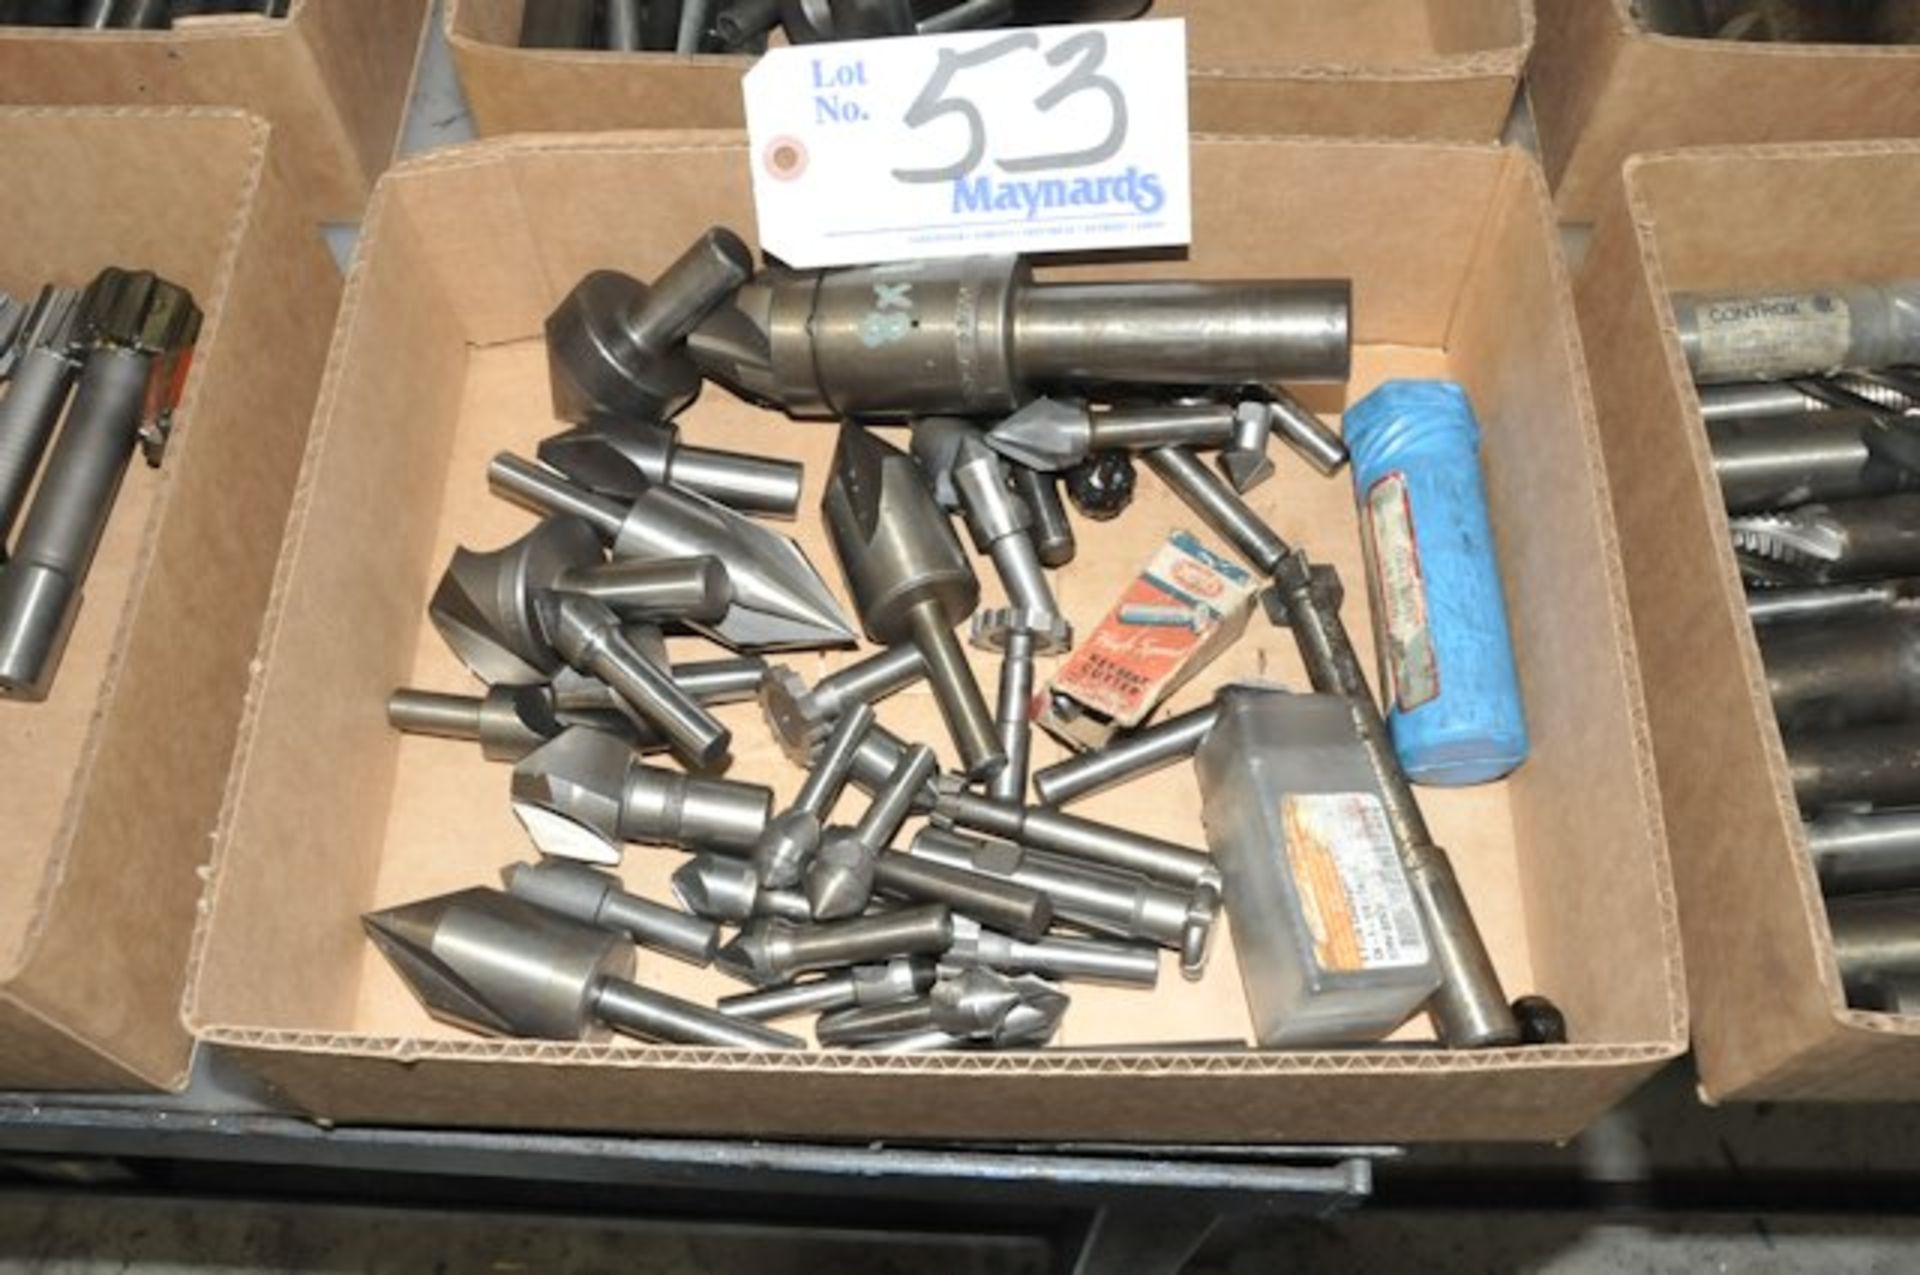 Box of Countersinks and Deburs